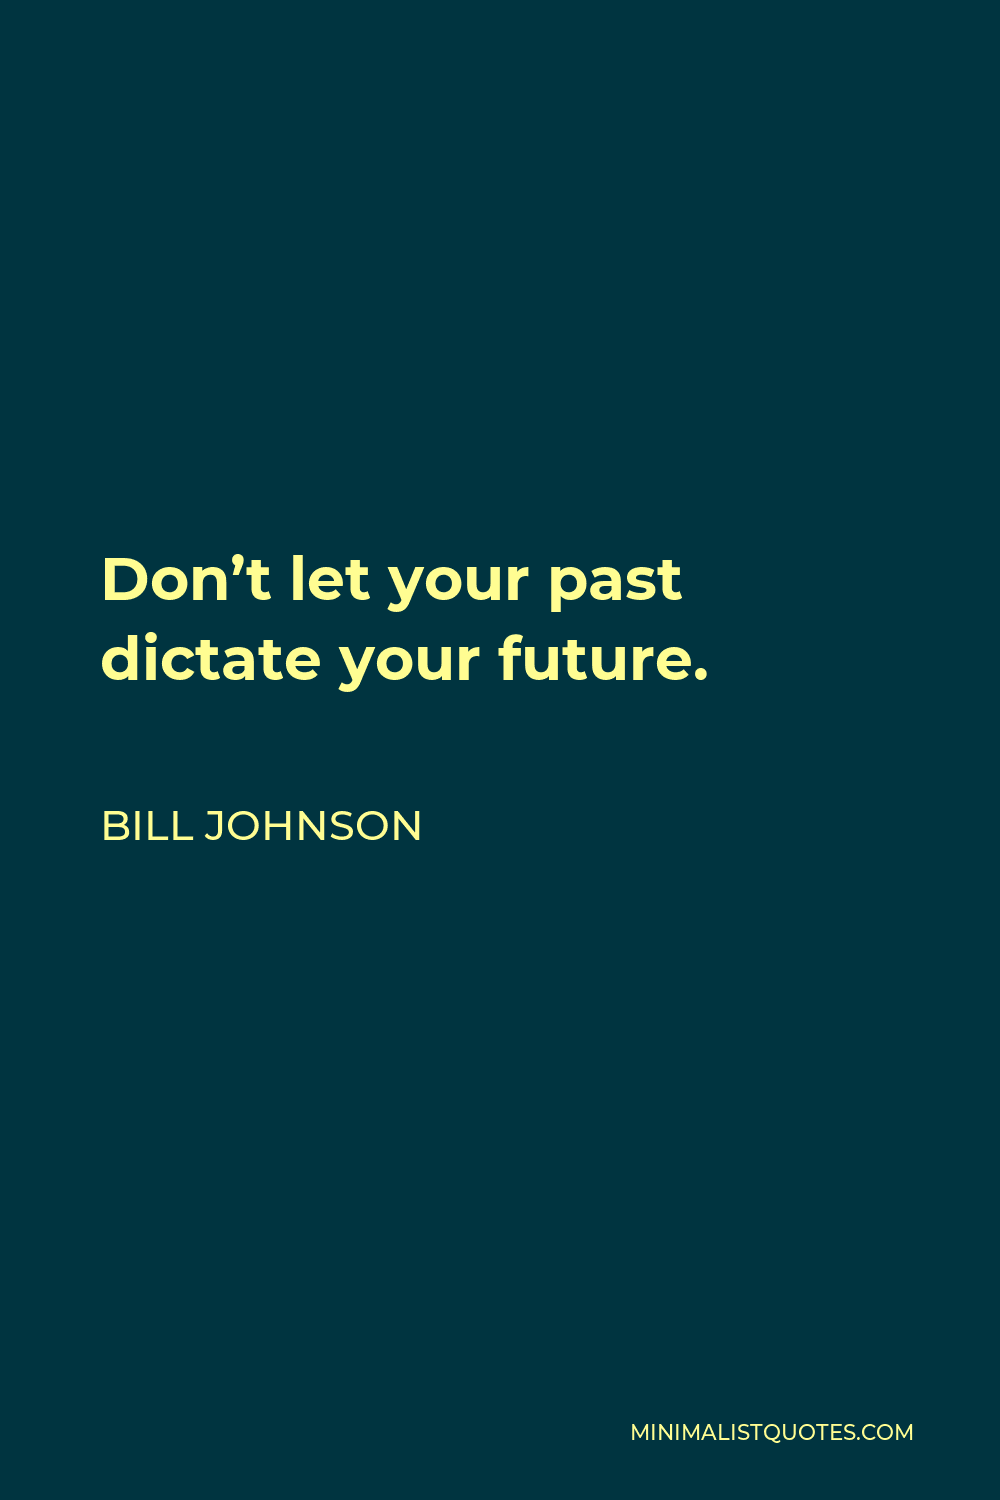 Bill Johnson Quote - Don’t let your past dictate your future.